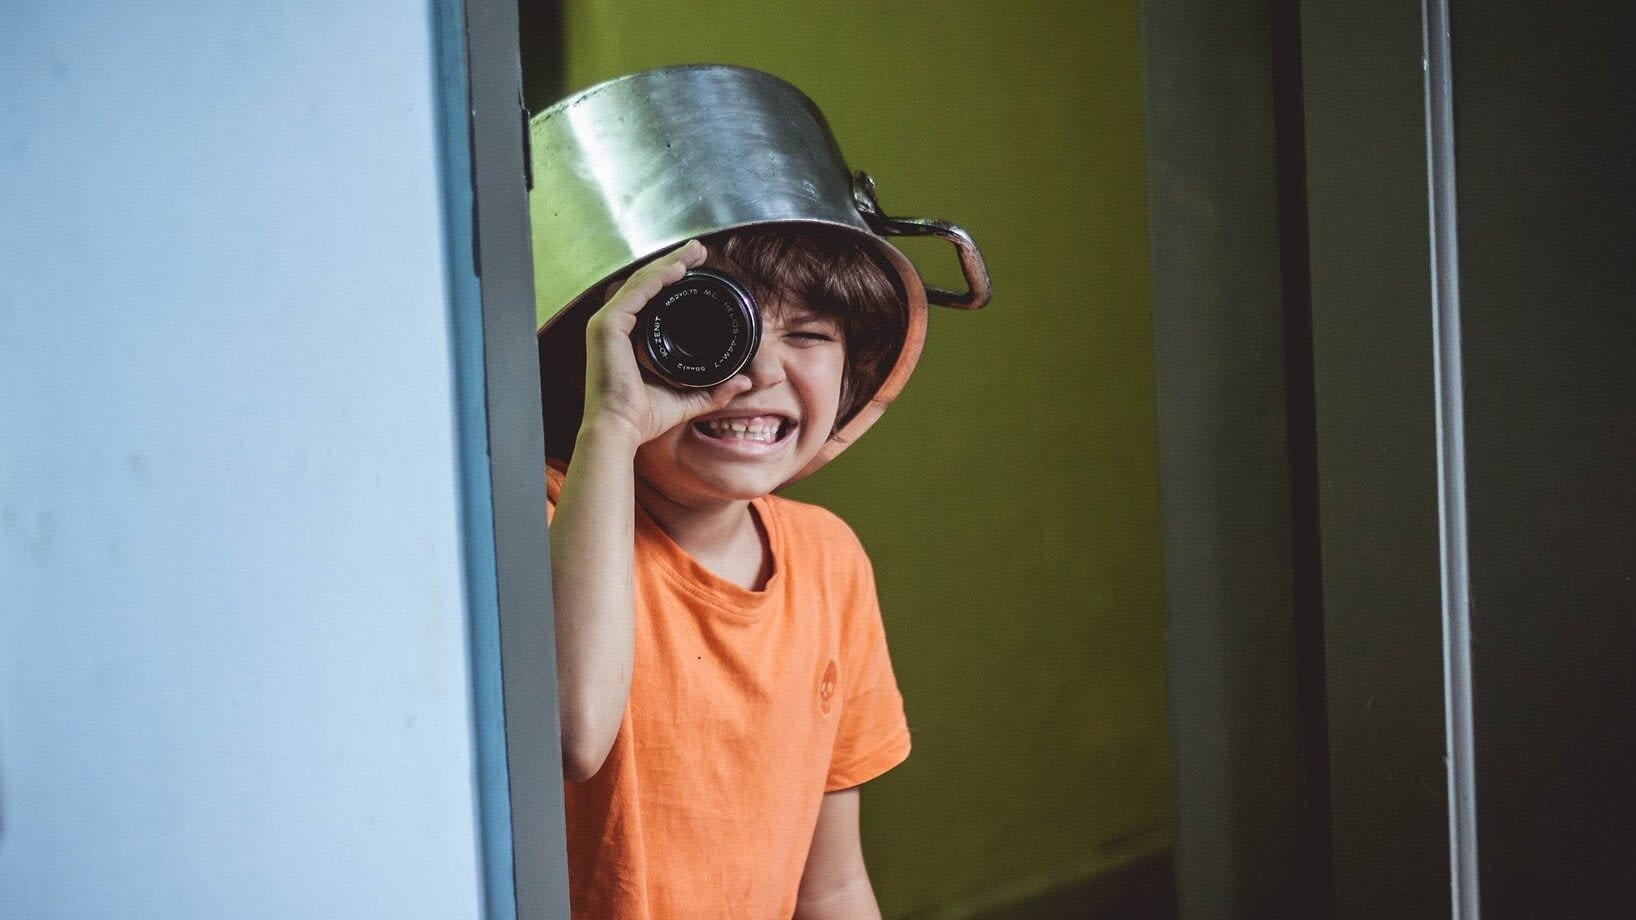 Image: child wearing a kitchen pot on their head, peeking around the corner with a camera lens as a telescope